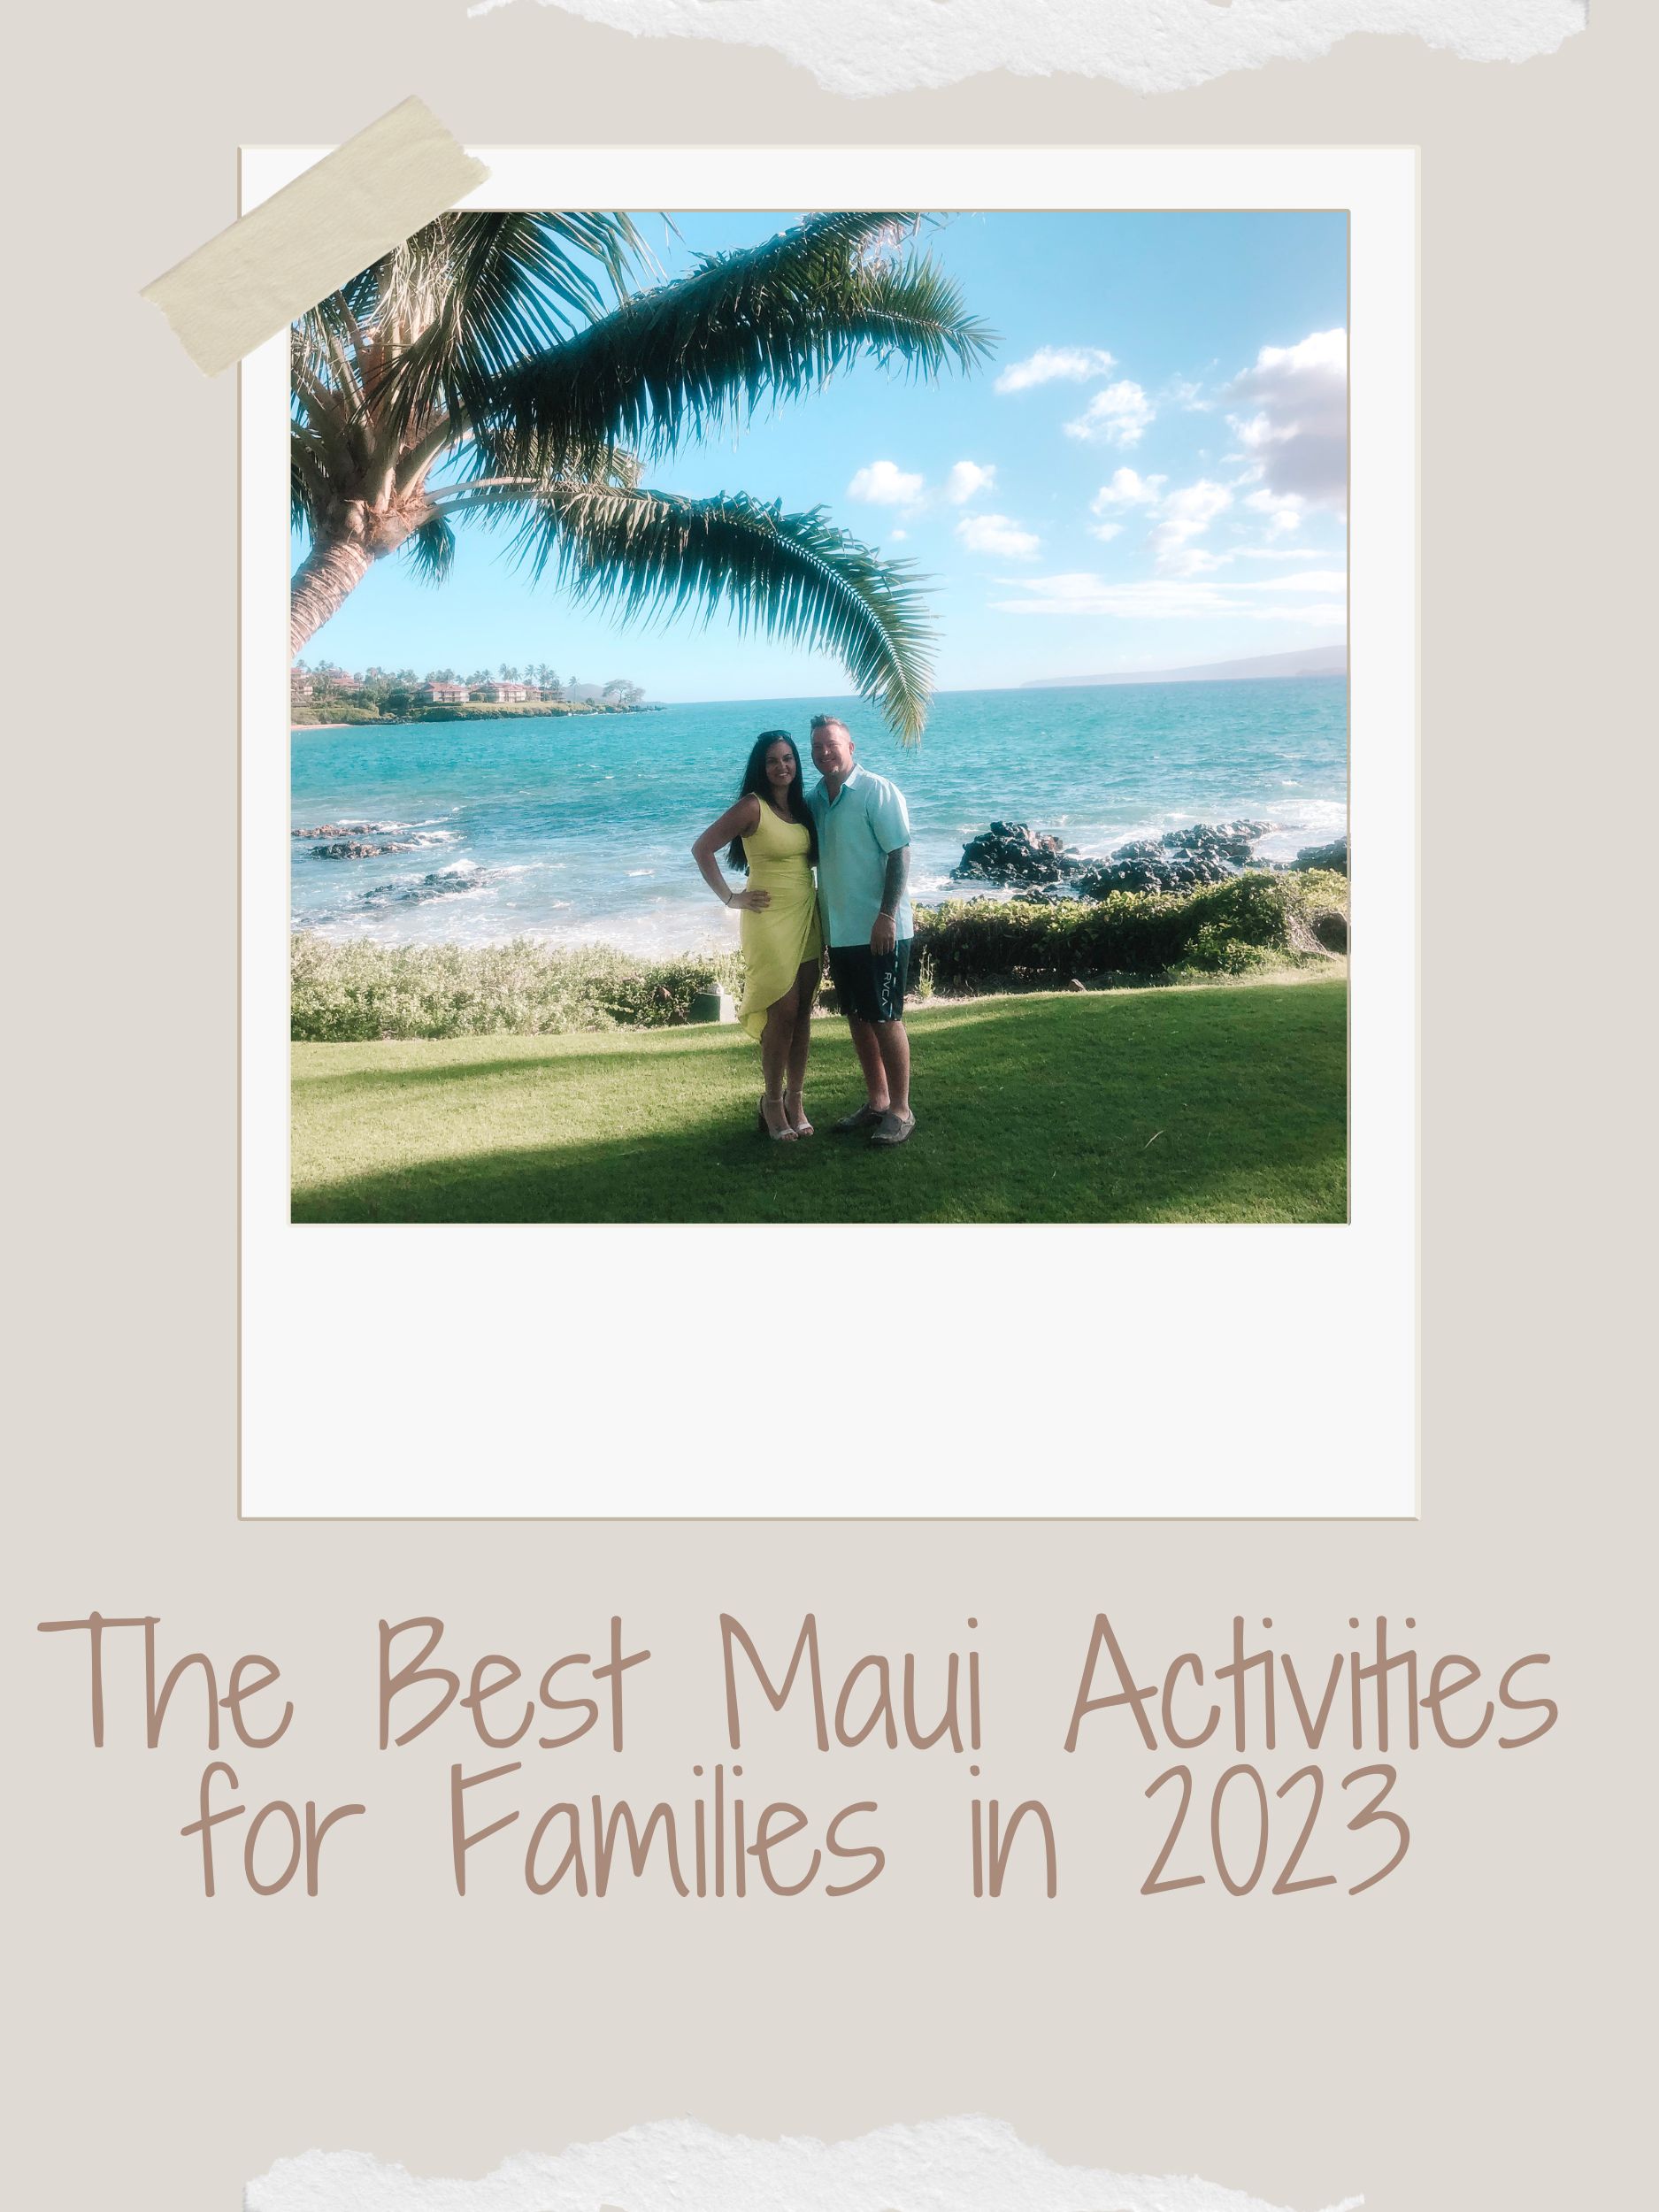 The Best Maui Activities for Families in 2023